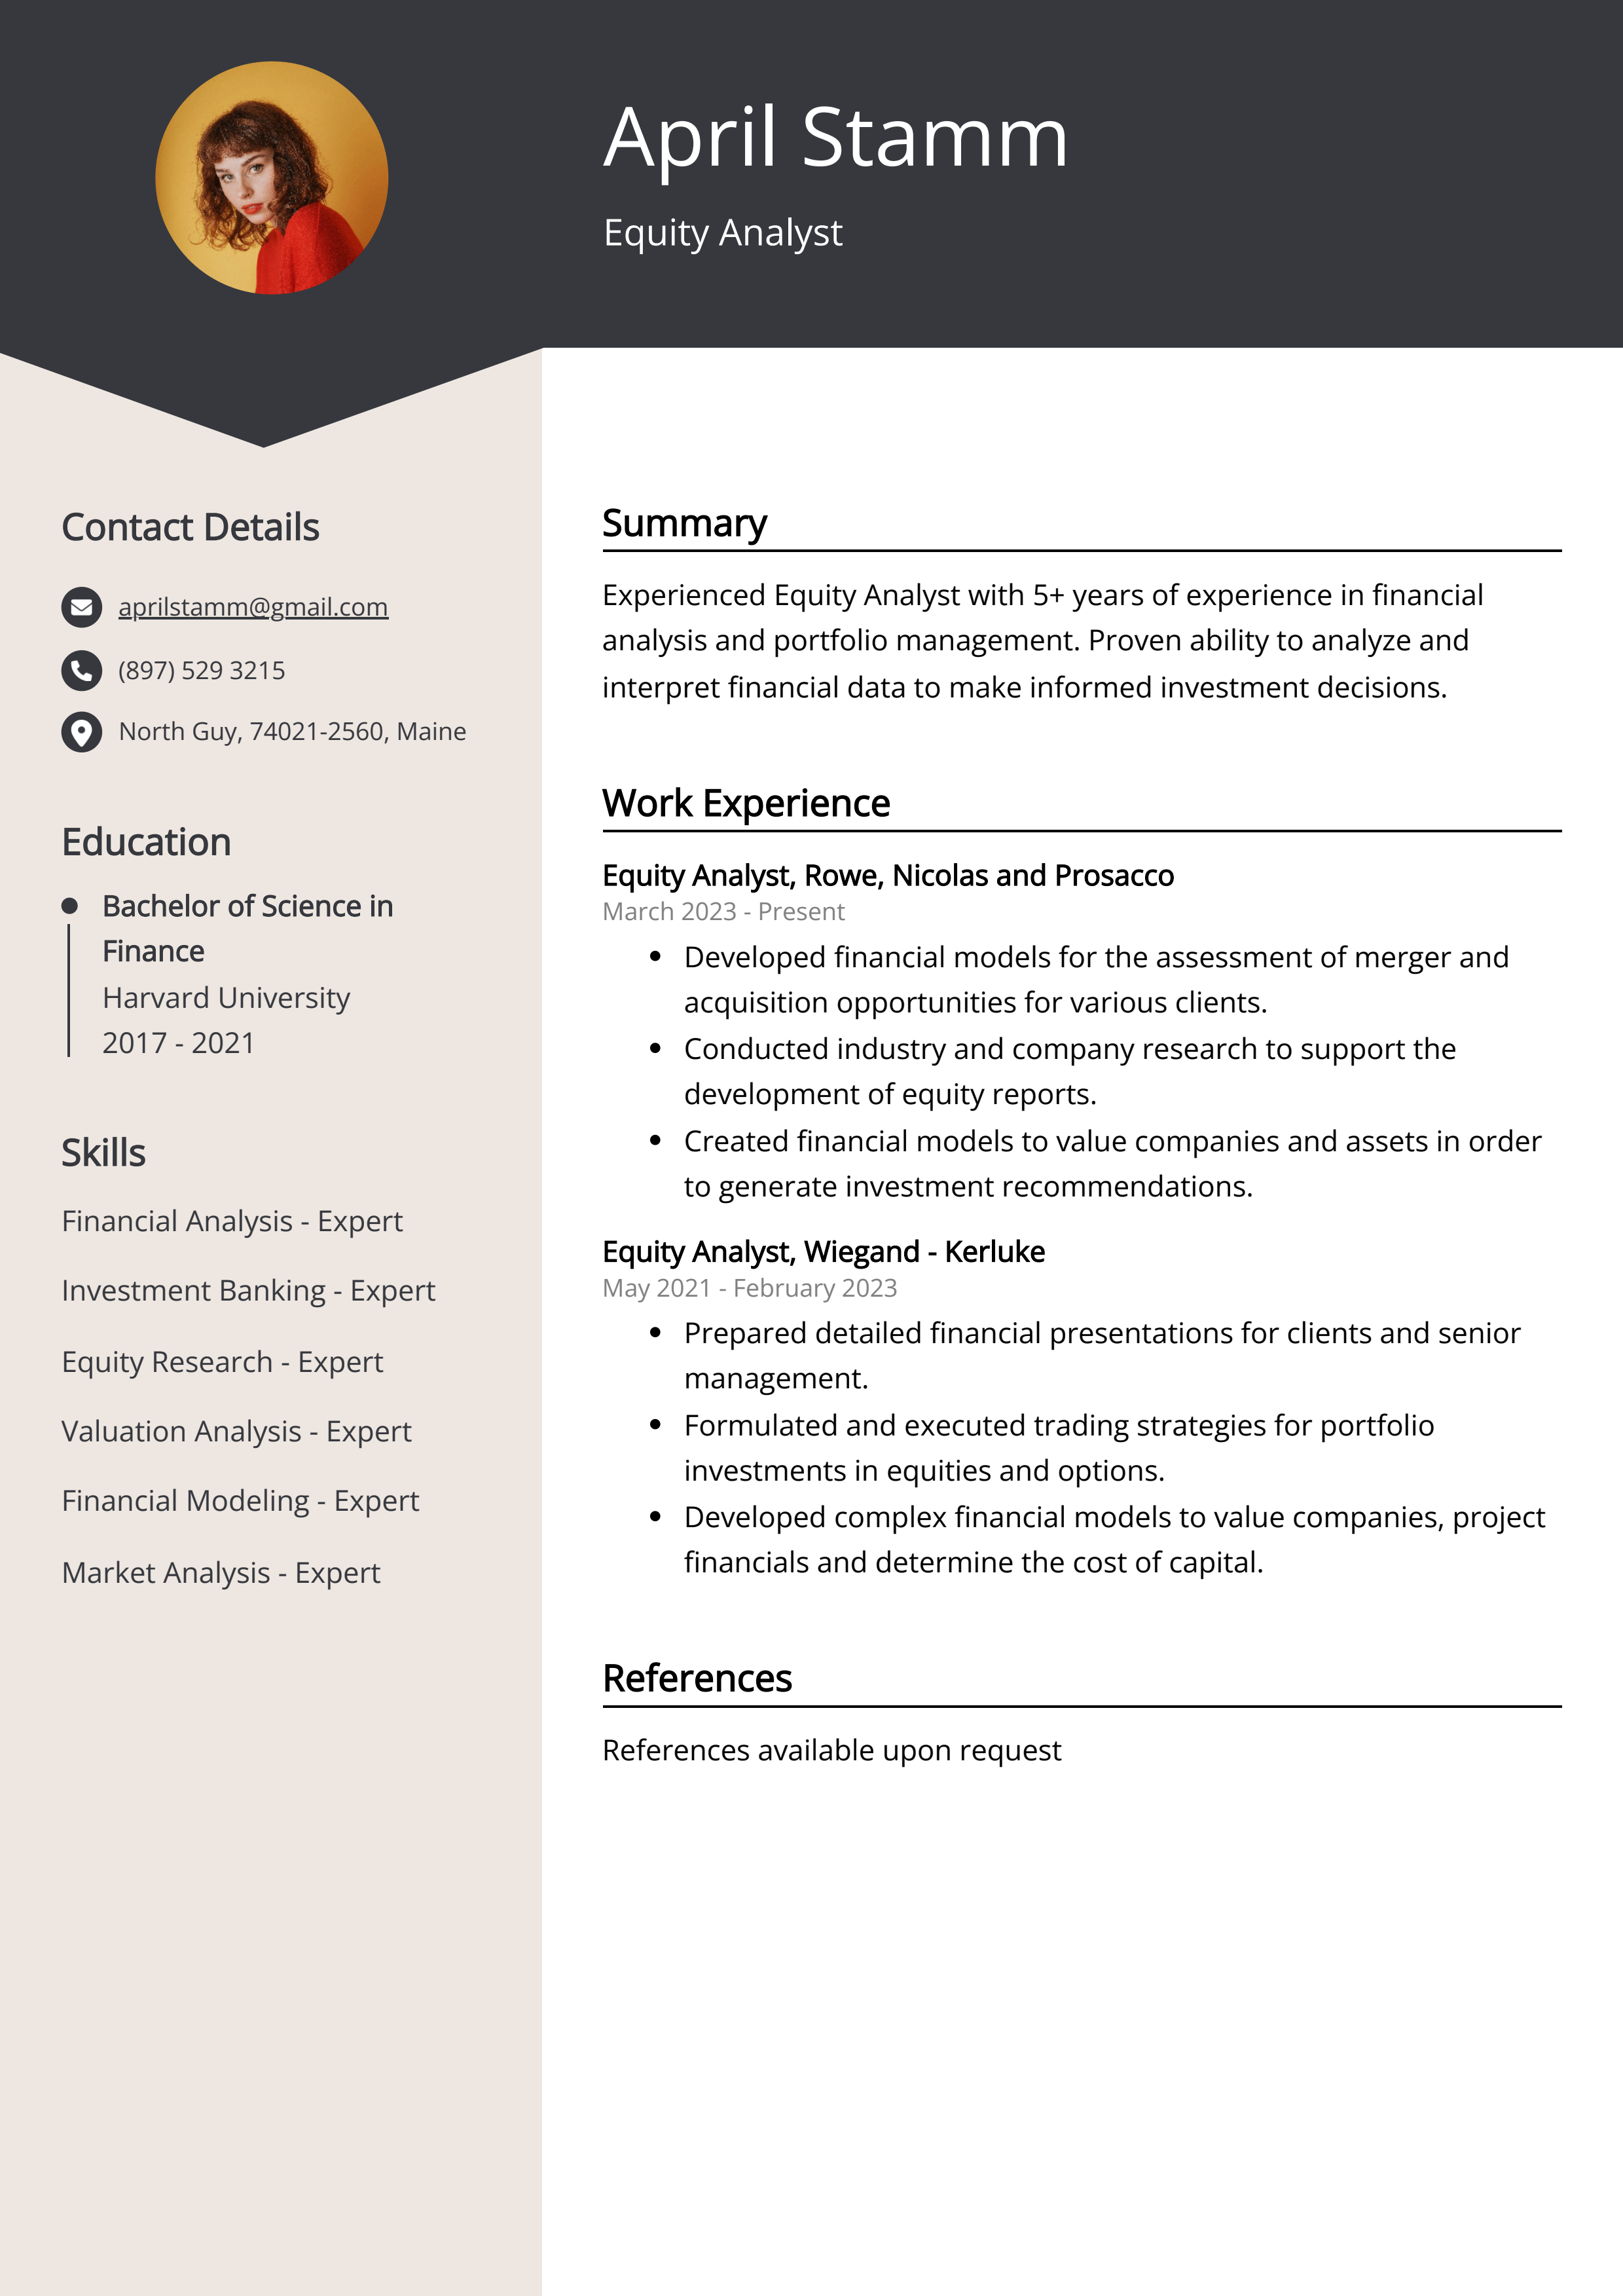 Equity Analyst CV Example